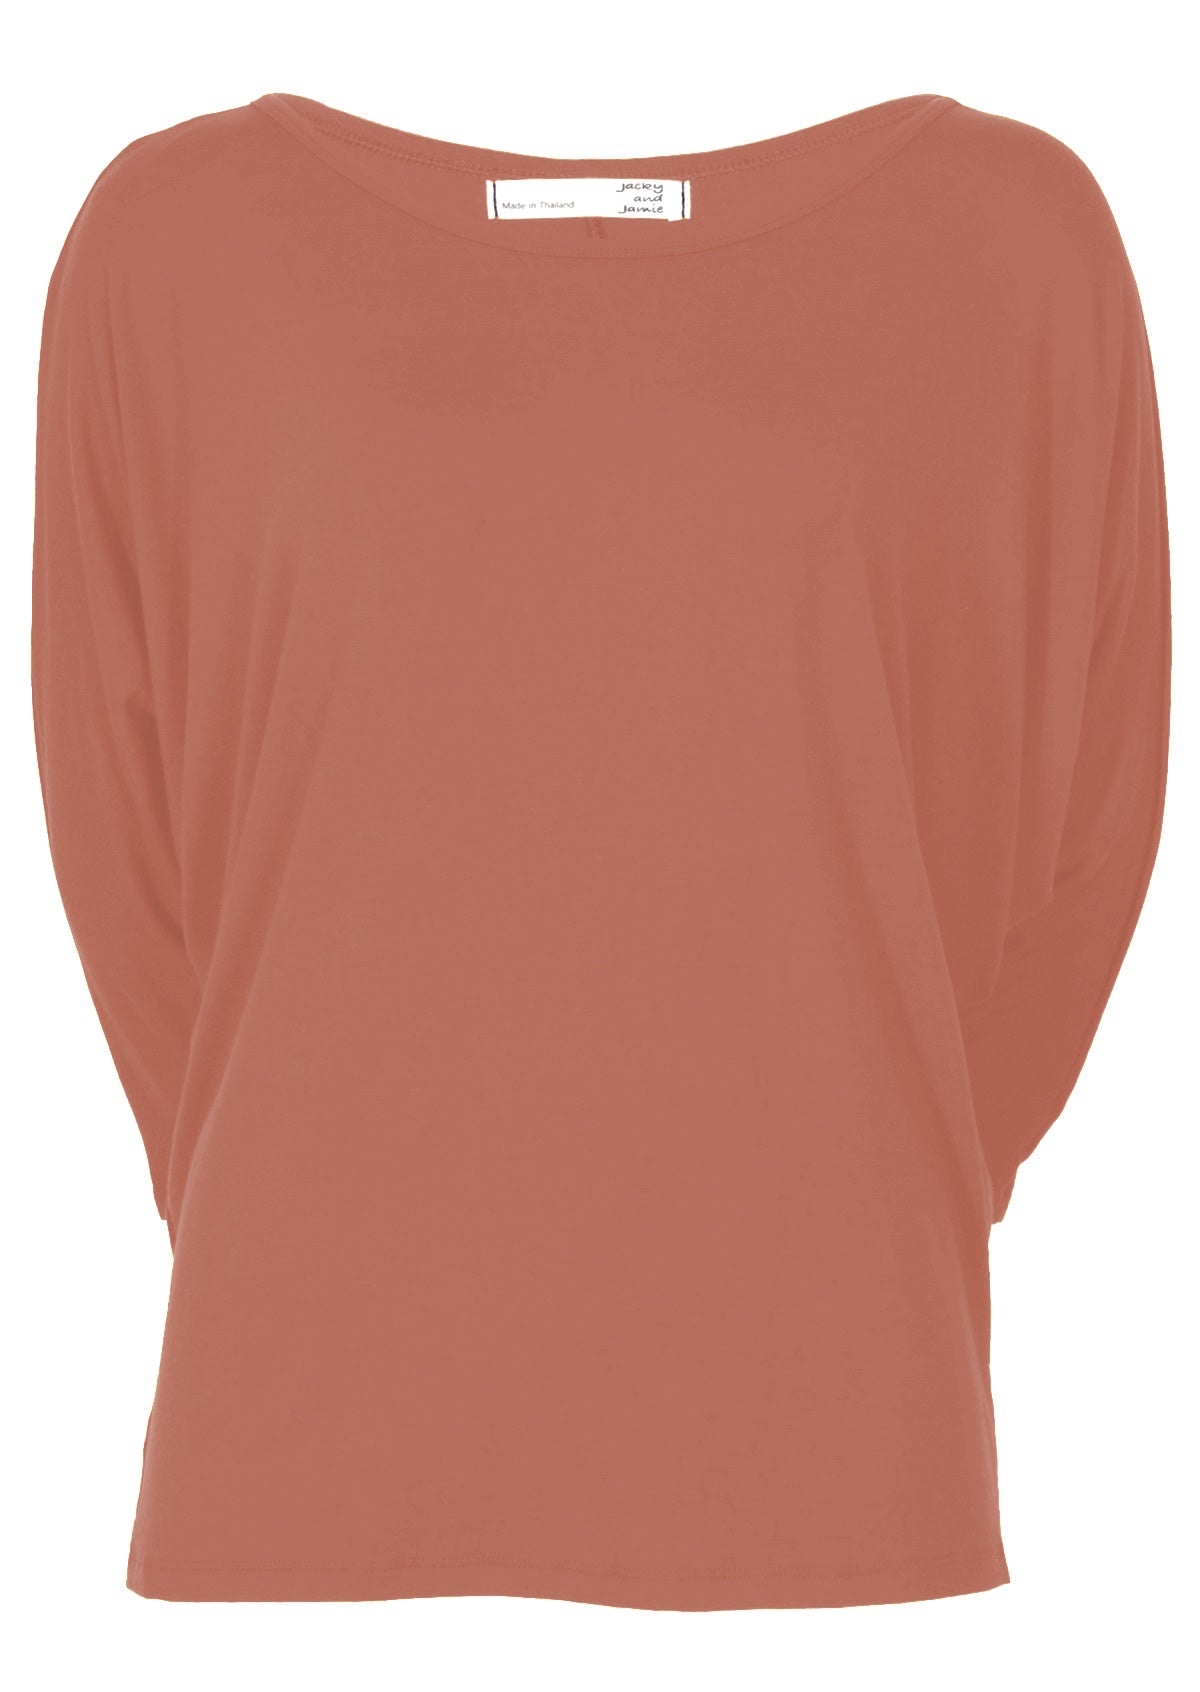 Front view of women's 3/4 sleeve rayon batwing round neckline dusty pink top.